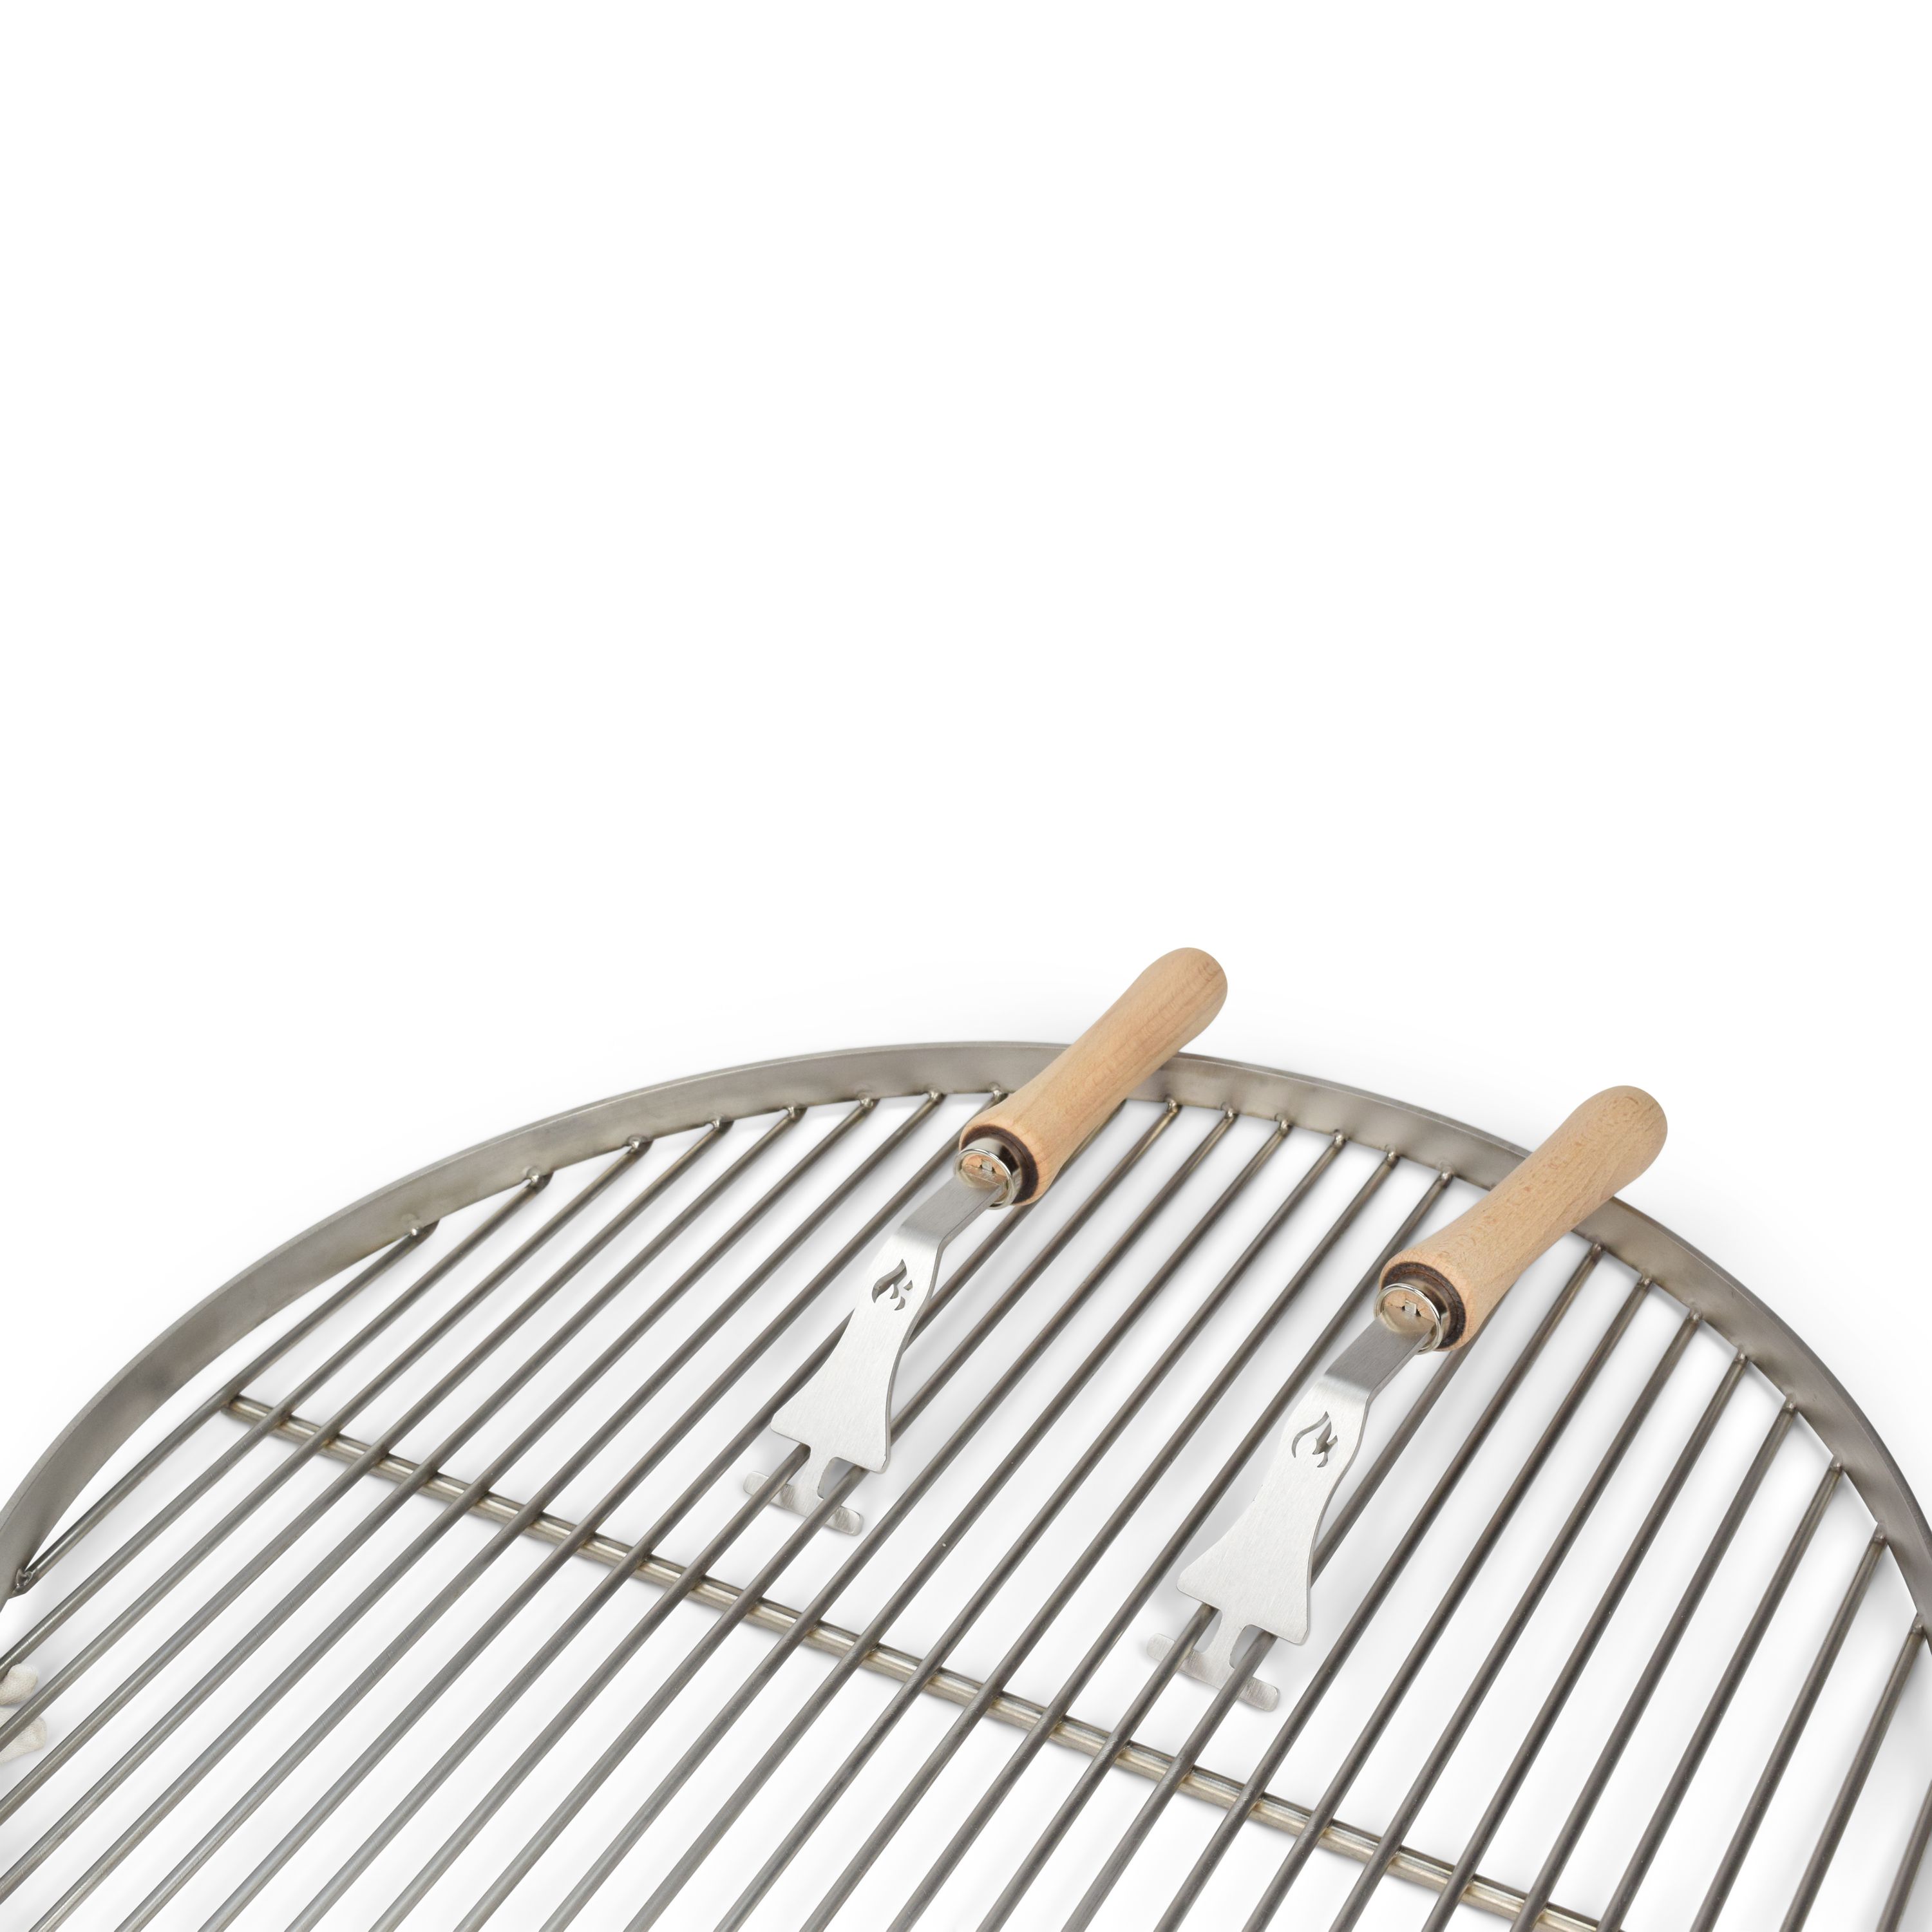 Removable handles for premium grill grates Bars run along depth of grate